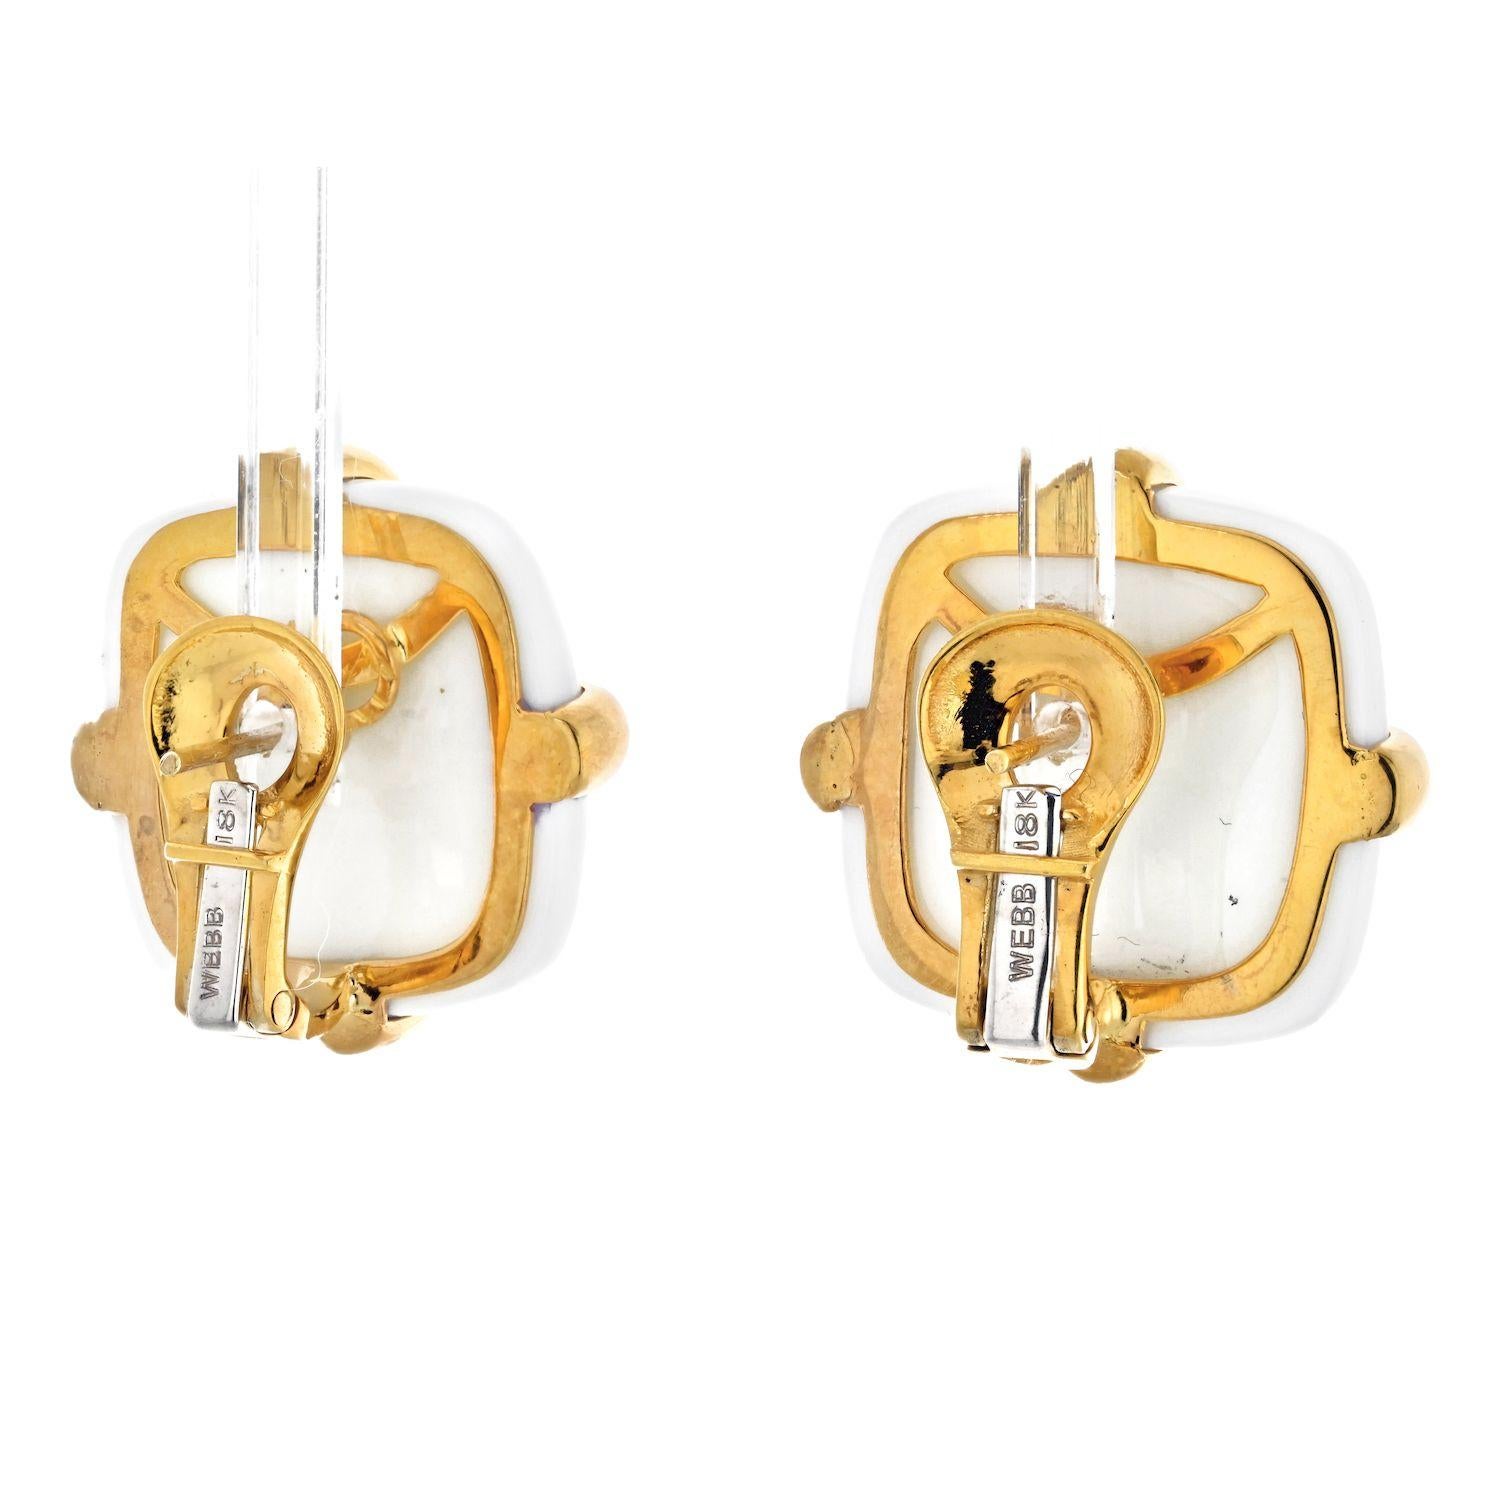 Elegant pair of clip earrings designed by David Webb. Crafted in solid yellow gold of 18 karats, with high polish finish. Embellished with a pair of squared cushioned cabochons cuts, carved from white Jasper. High polished criss cross gold wires add